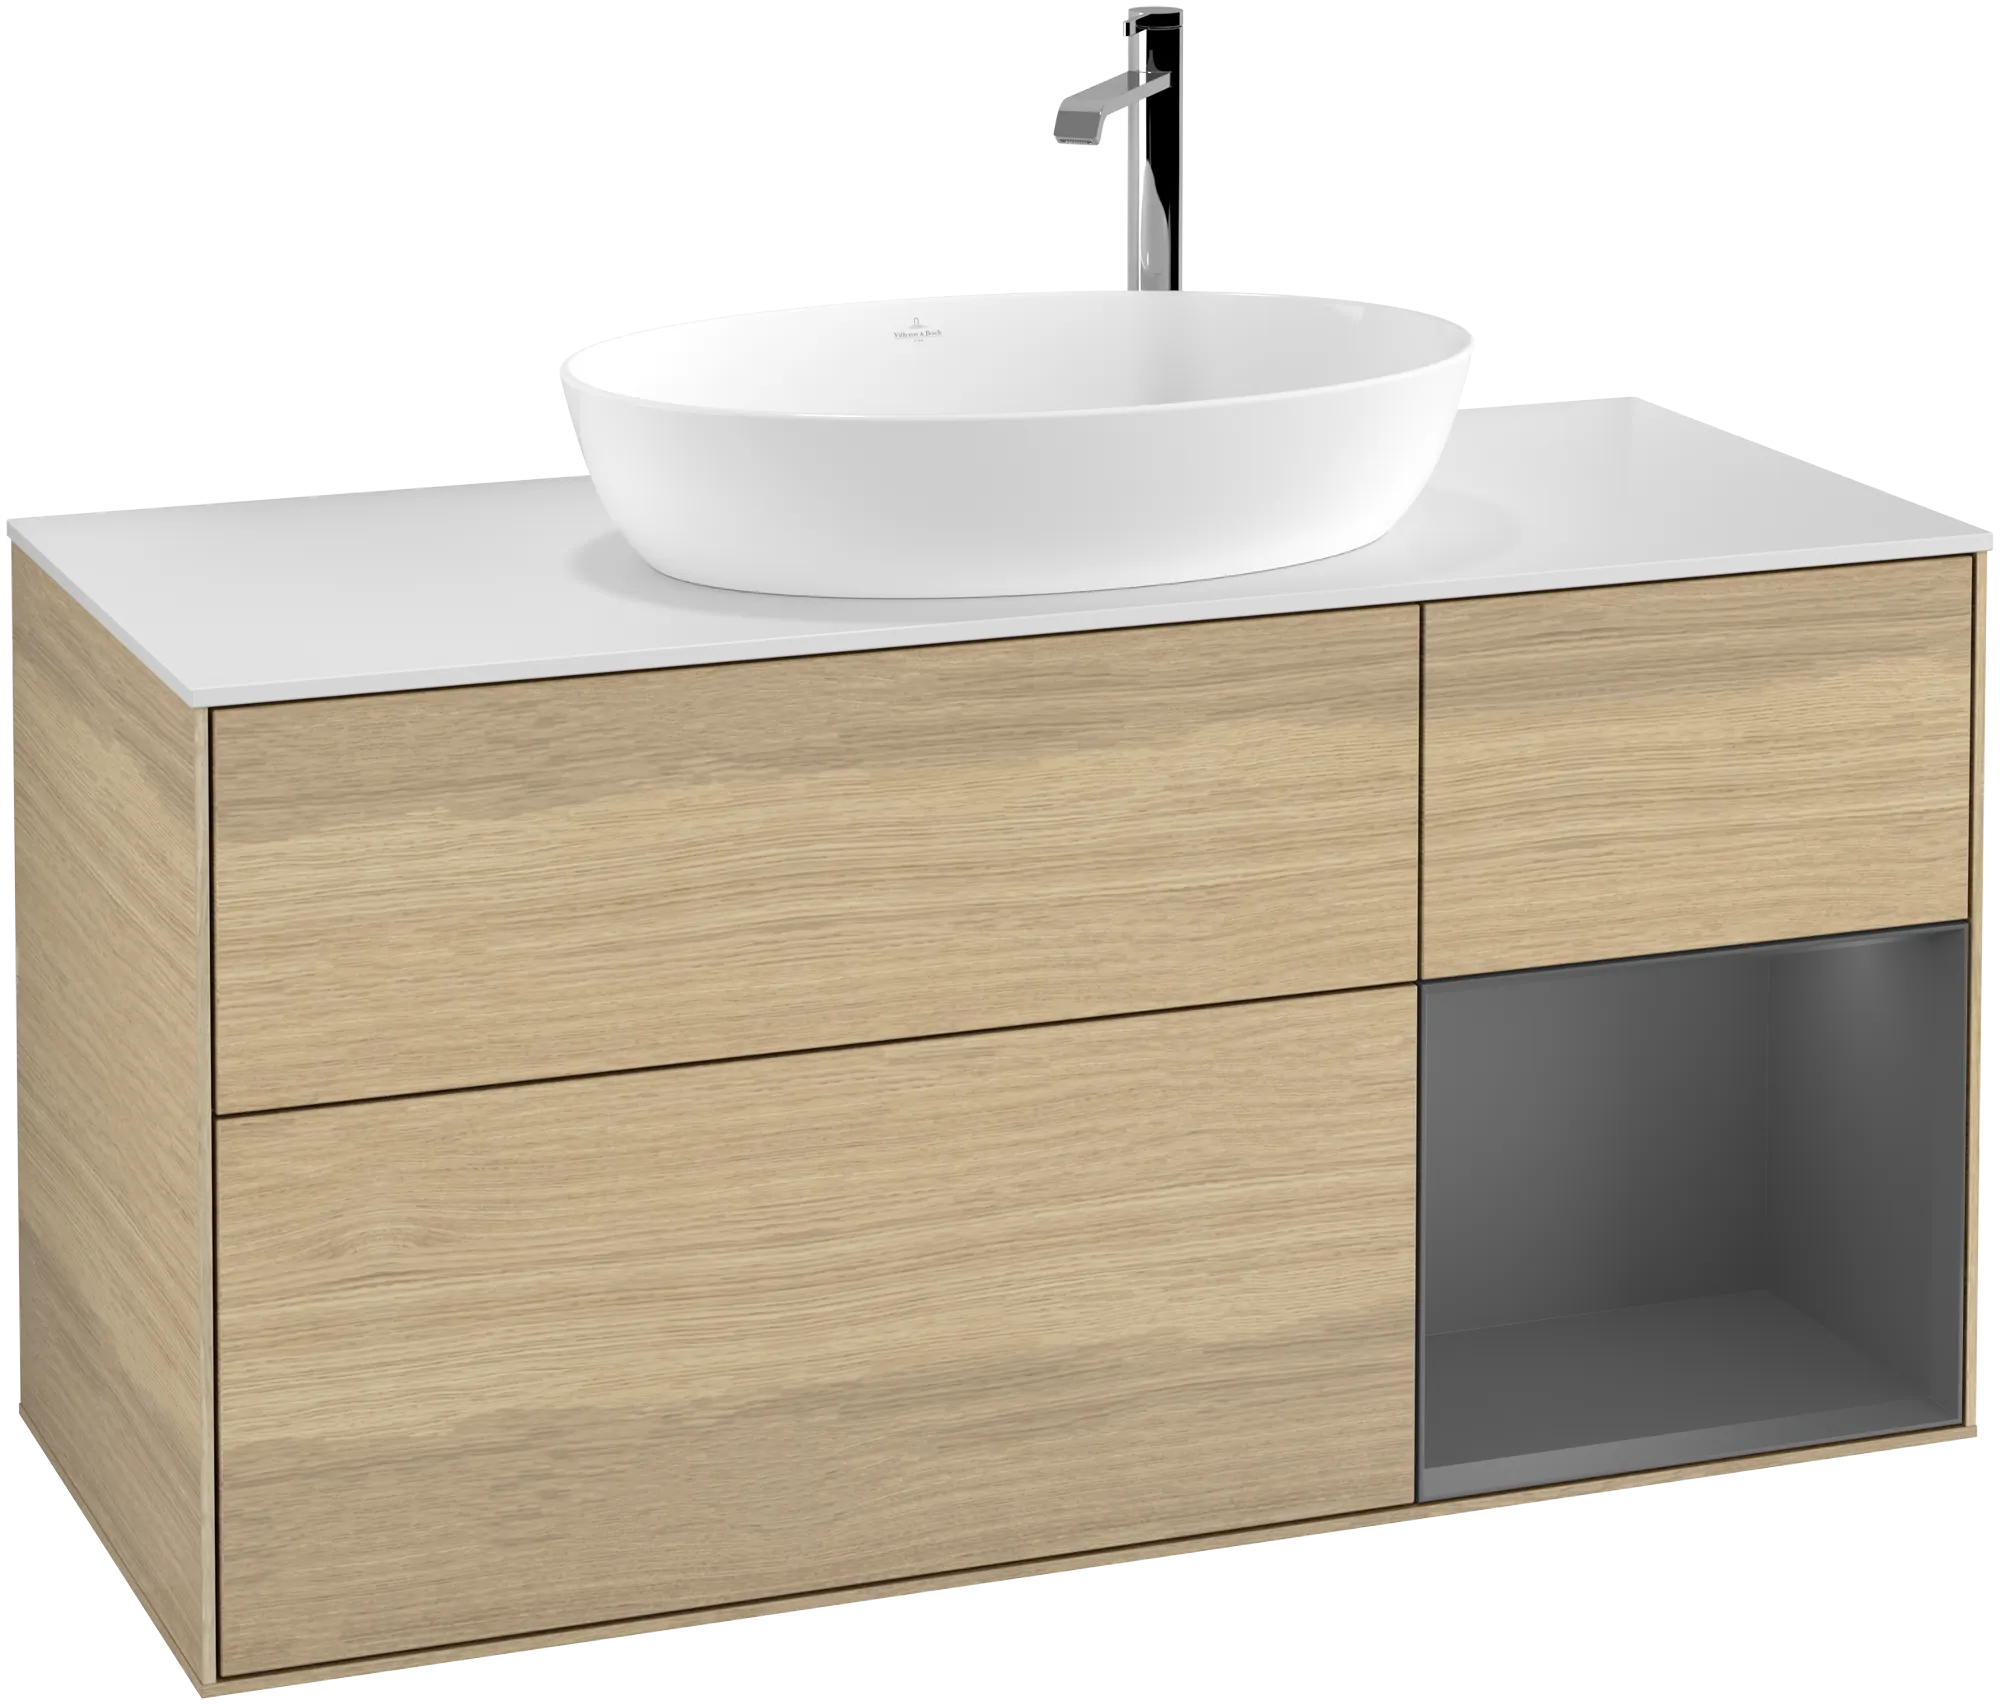 VILLEROY BOCH Finion Vanity unit, with lighting, 3 pull-out compartments, 1200 x 603 x 501 mm, Oak Veneer / Anthracite Matt Lacquer / Glass White Matt #G951GKPC resmi